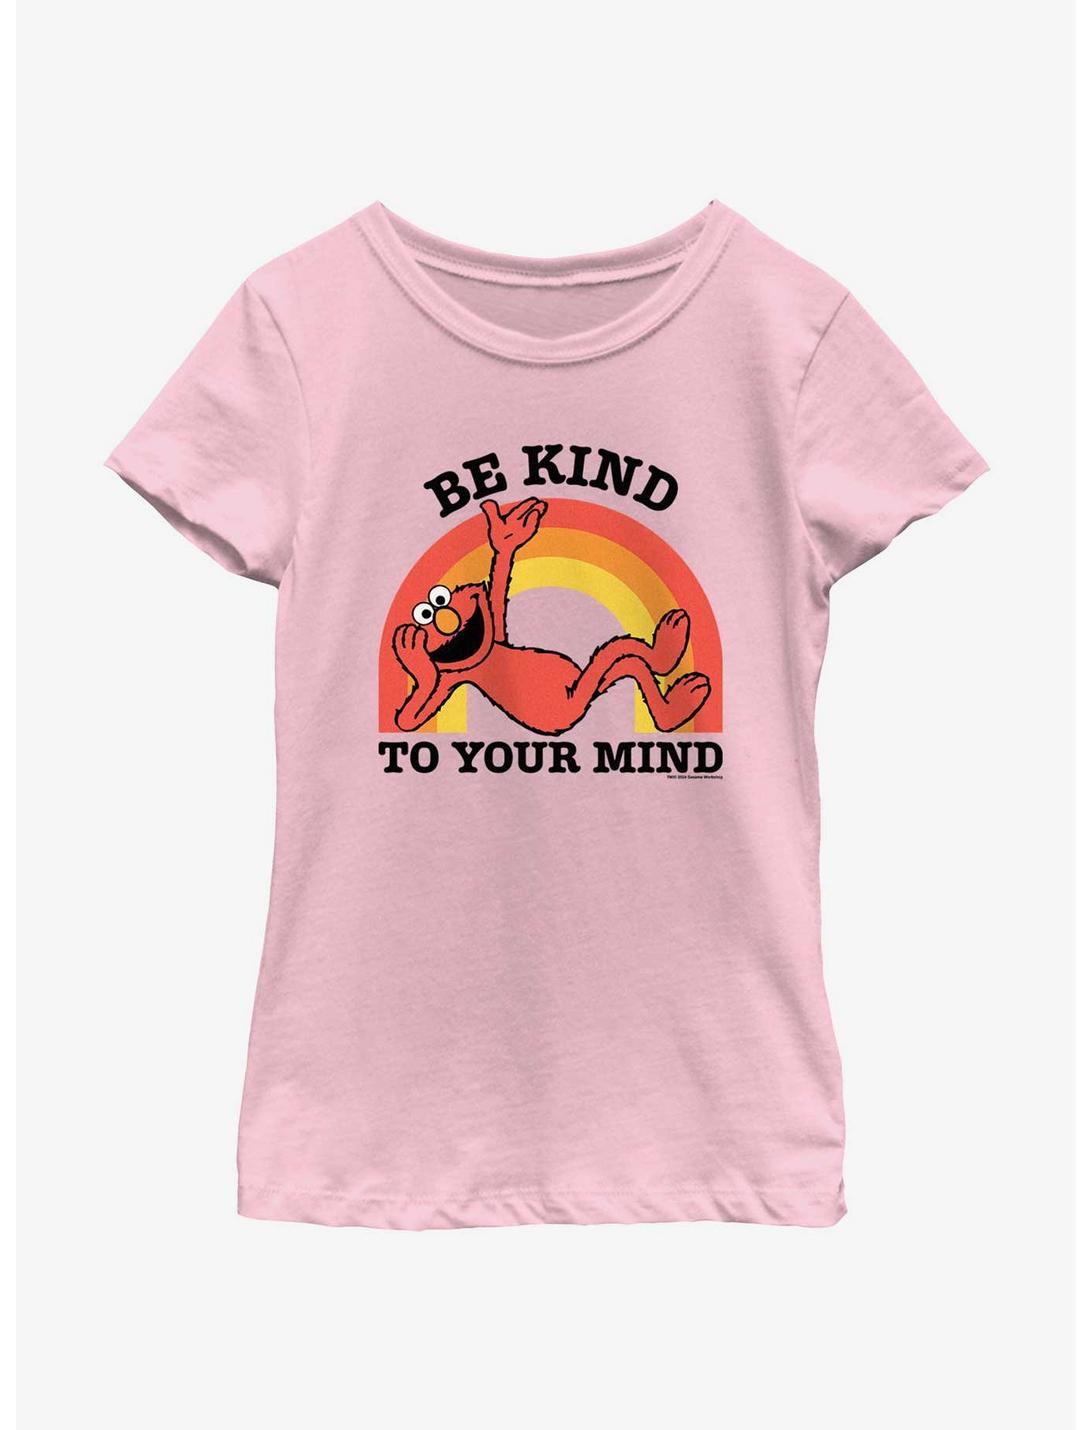 Sesame Street Elmo Be Kind To Your Mind Youth Girls T-Shirt, PINK, hi-res